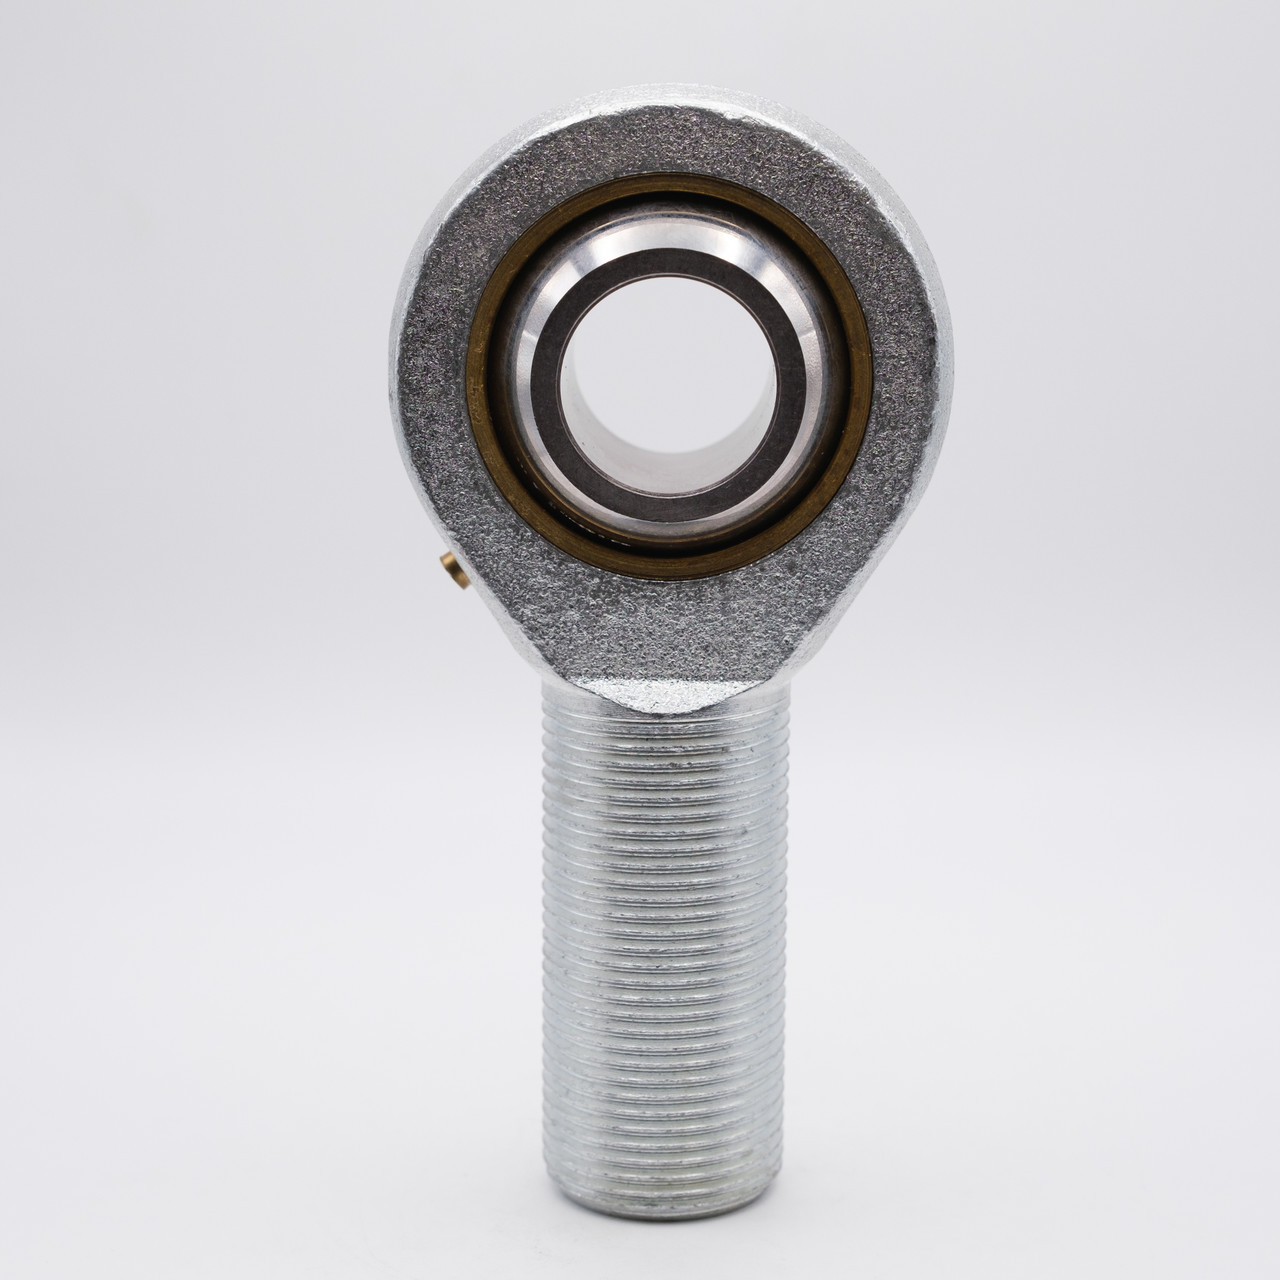 POS12 Rod-End Bearing 12mm Bore Front View